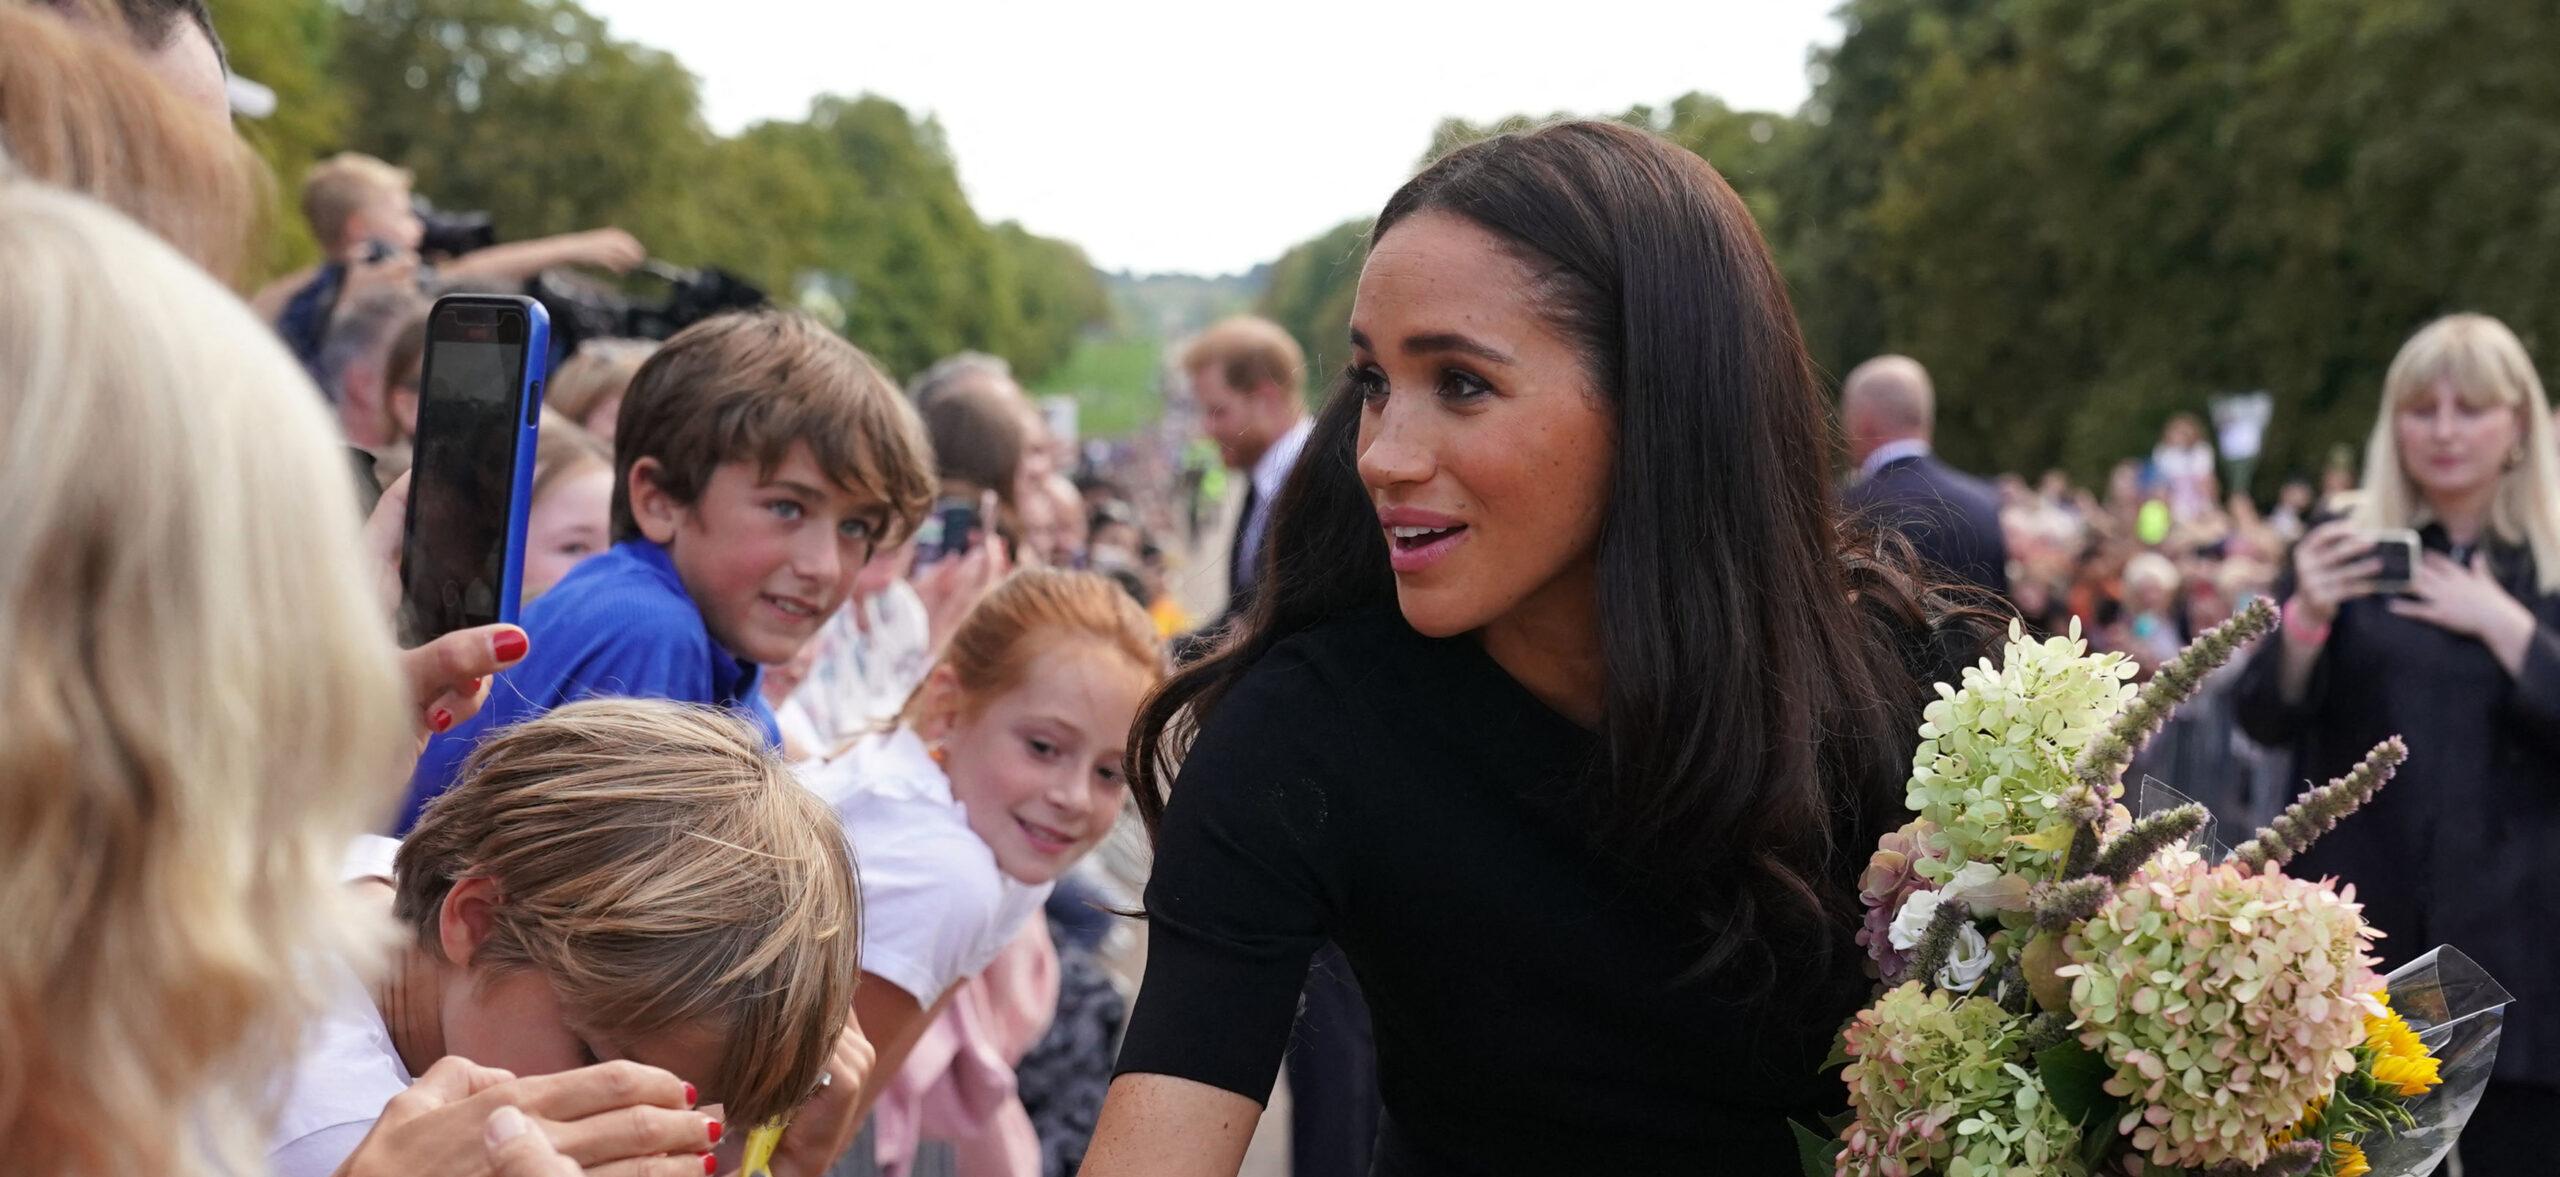 The Princess of Wales the Prince of Wales and the Duke and Duchess of Sussex meeting members of the public at Windsor Castle in Berkshire following the death of Queen Elizabeth II on Thursday